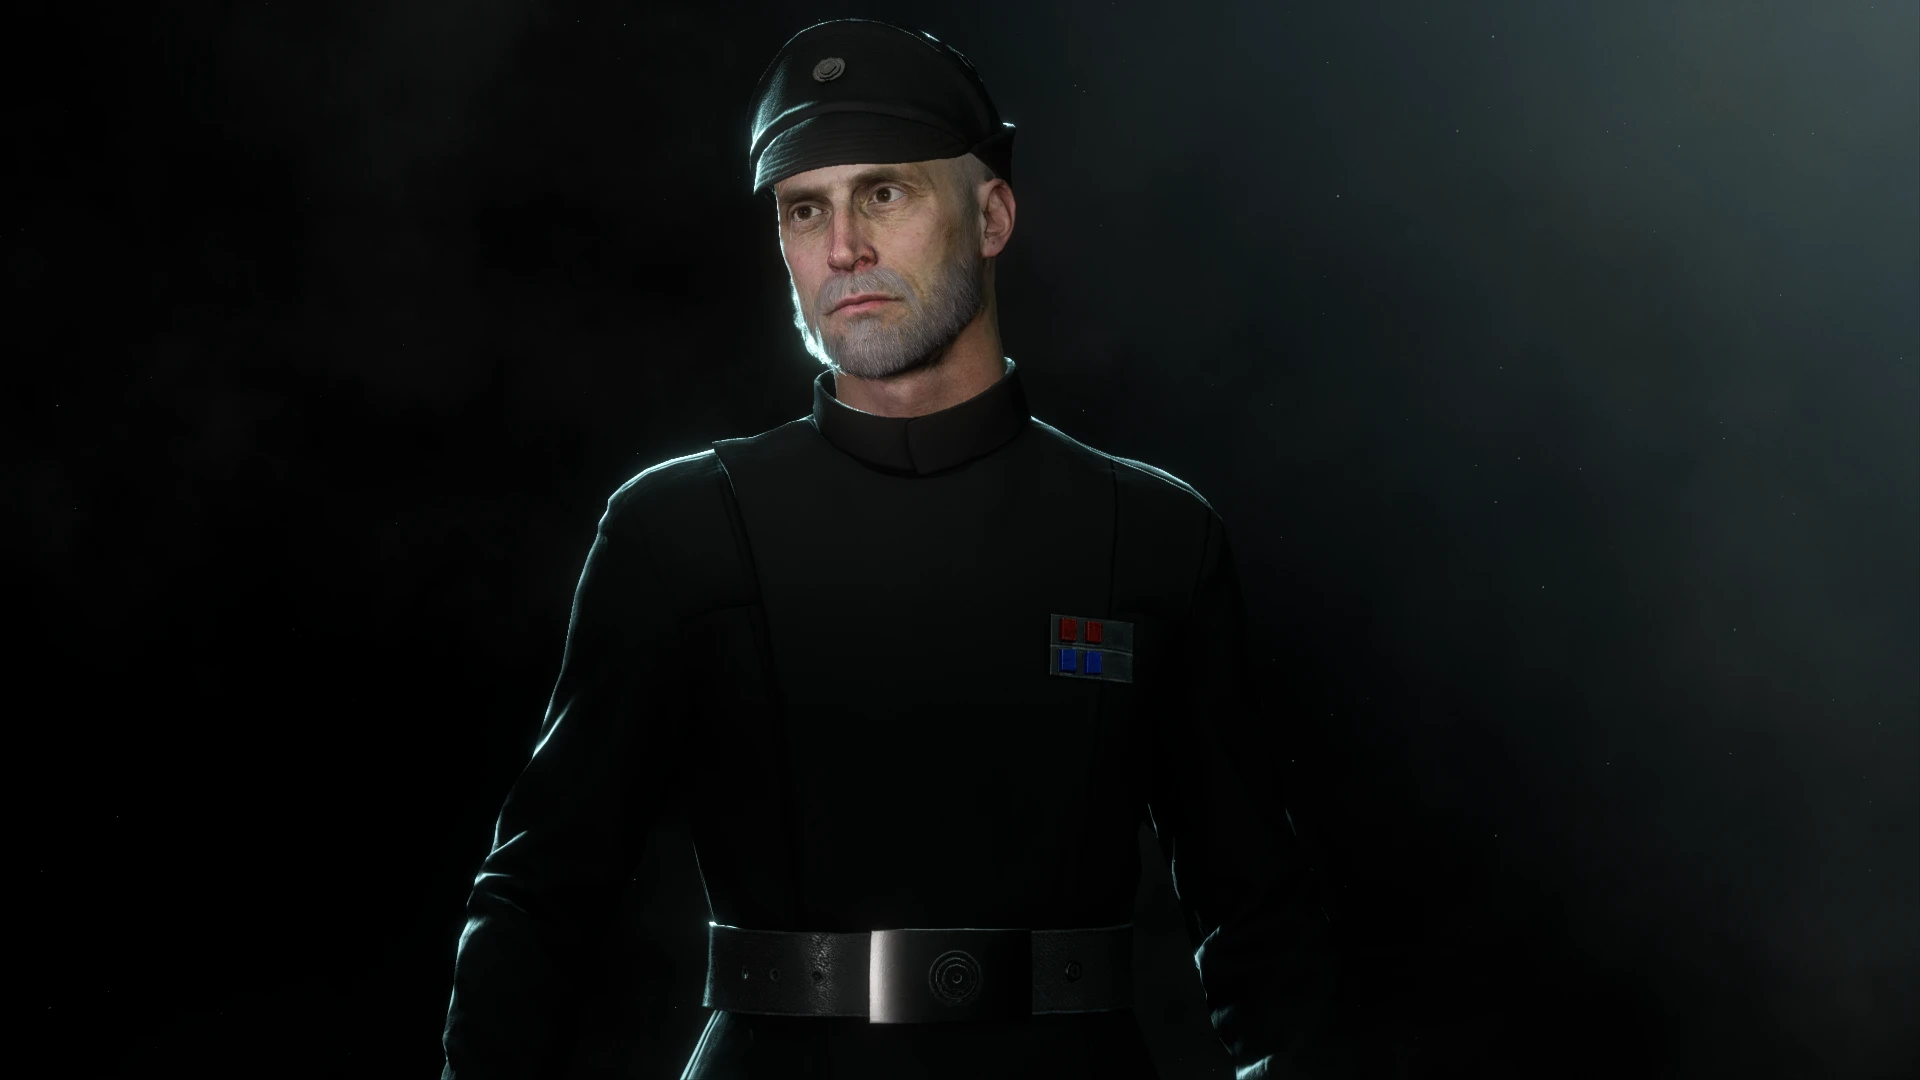 star wars imperial navy instructor who defies emperor